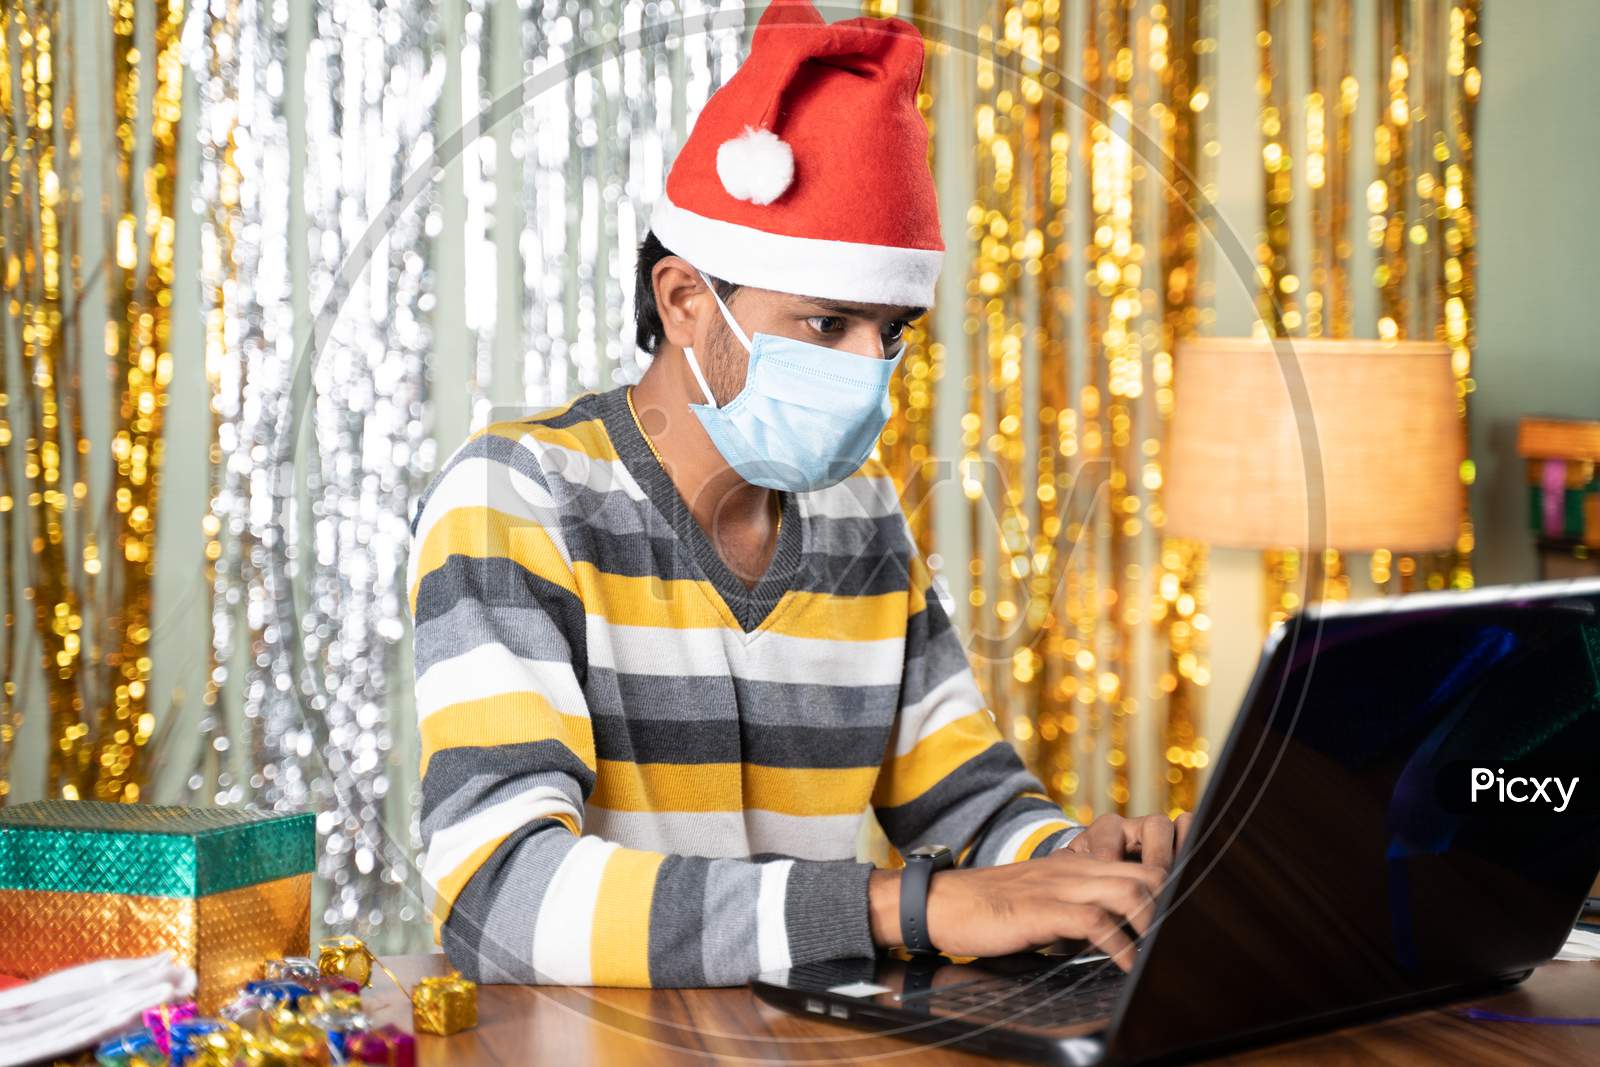 Young Man In Medical Mask Busy Working On Laptop During Christmas Or New Year Celebration Eve With Decorated Background And Gifts In Front - Concept Of Work From Home During Holydays.